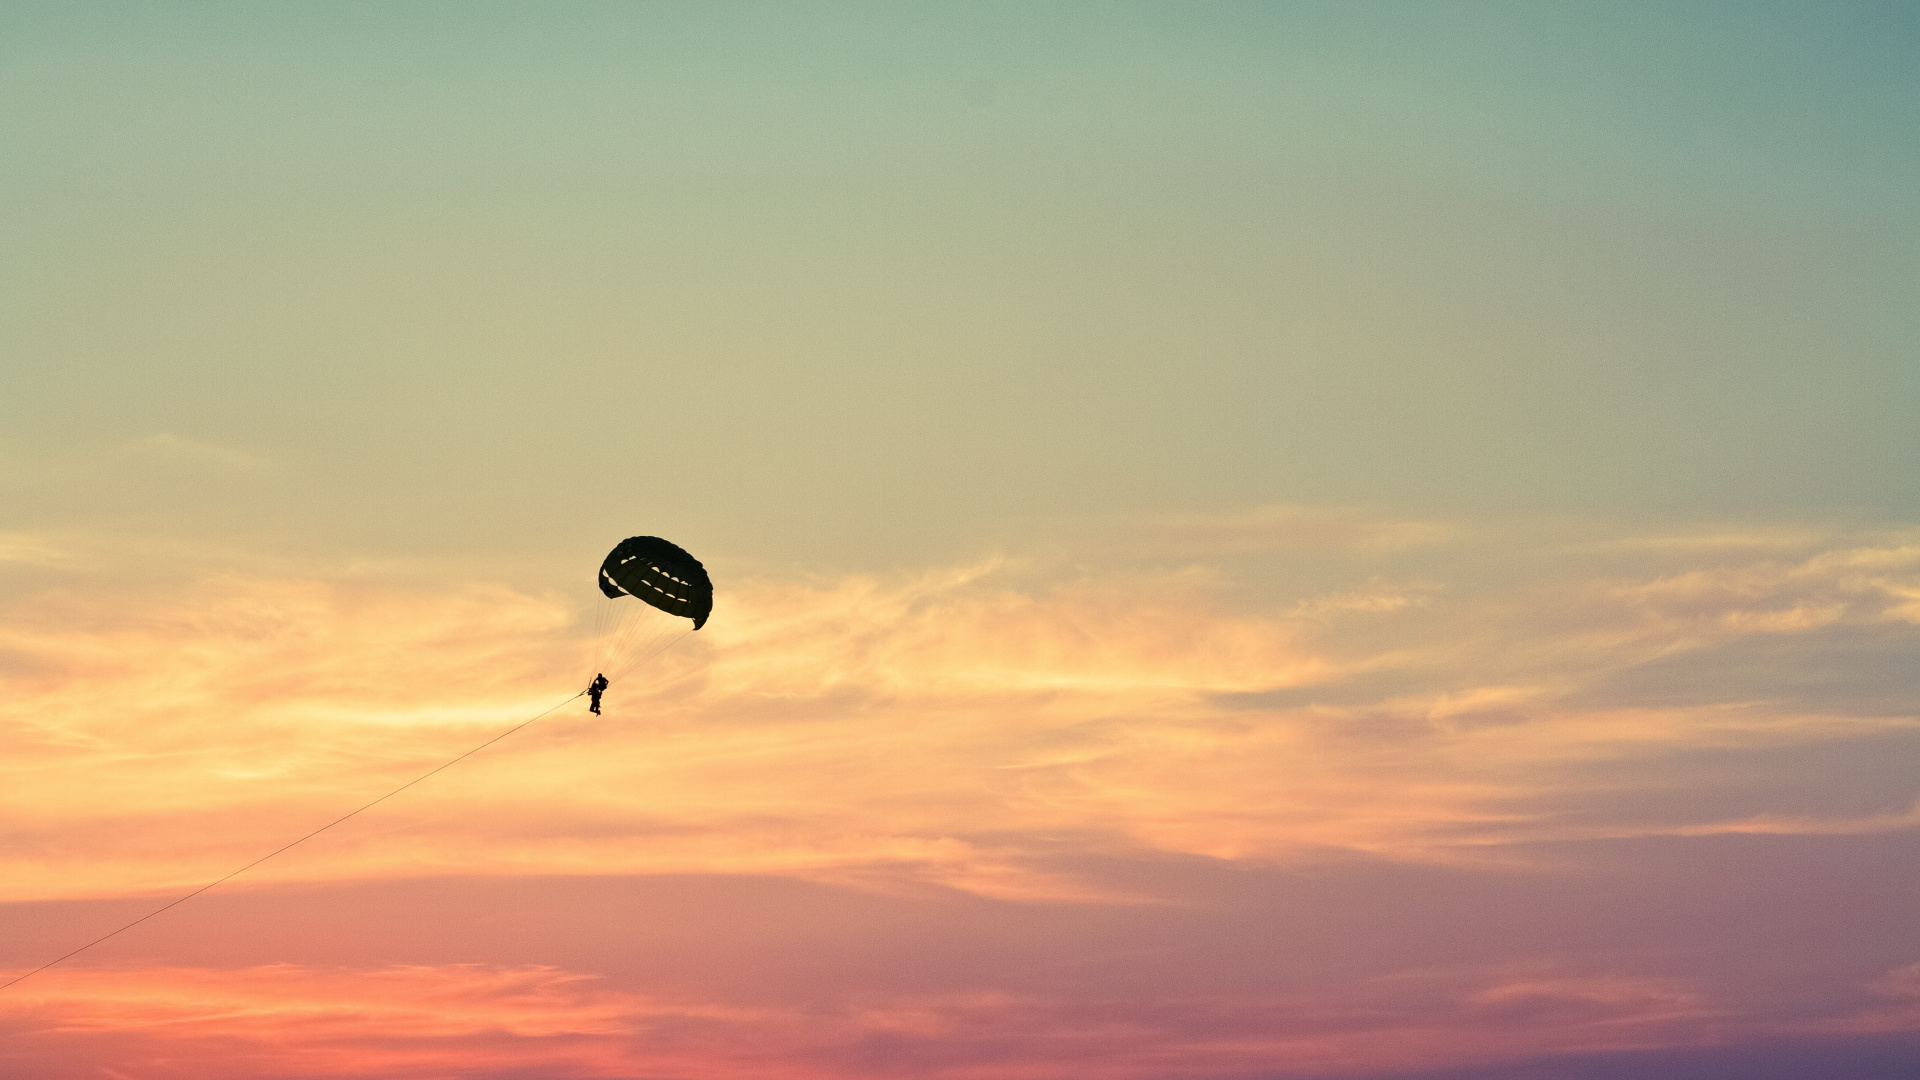 Person in Parachute Under Blue Sky During Daytime. Wallpaper in 1920x1080 Resolution